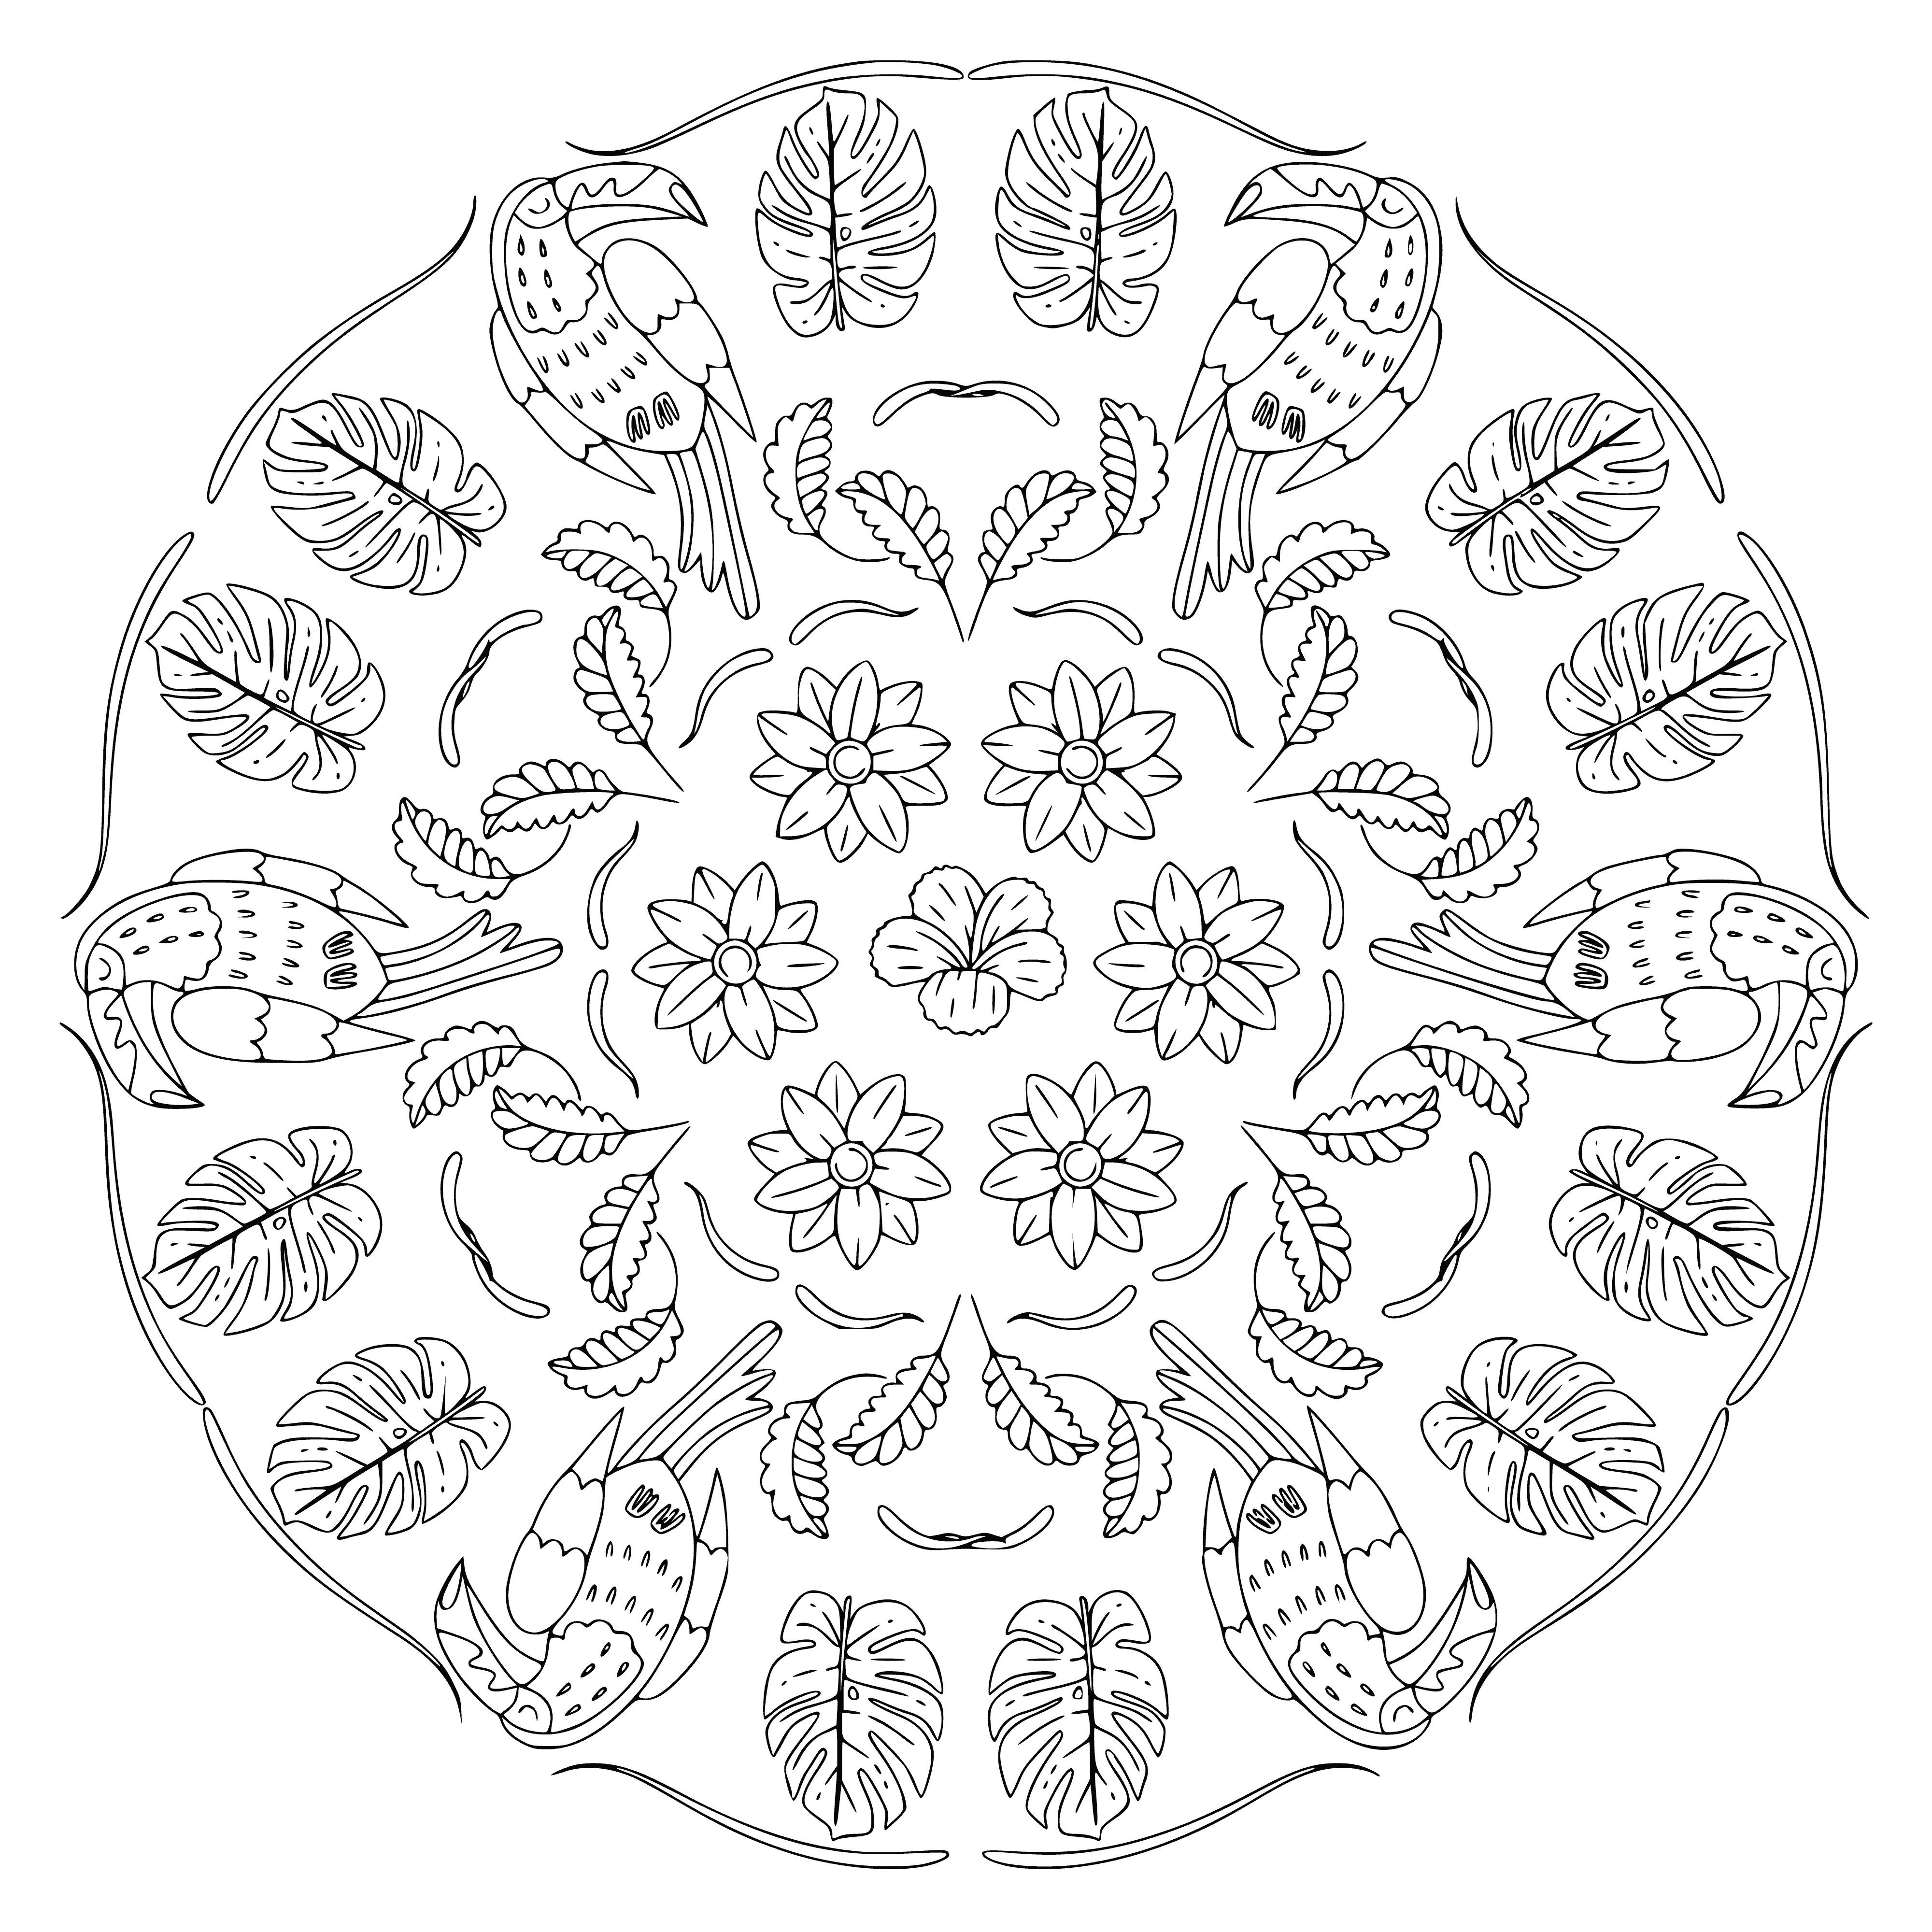 Mandala with birds coloring page